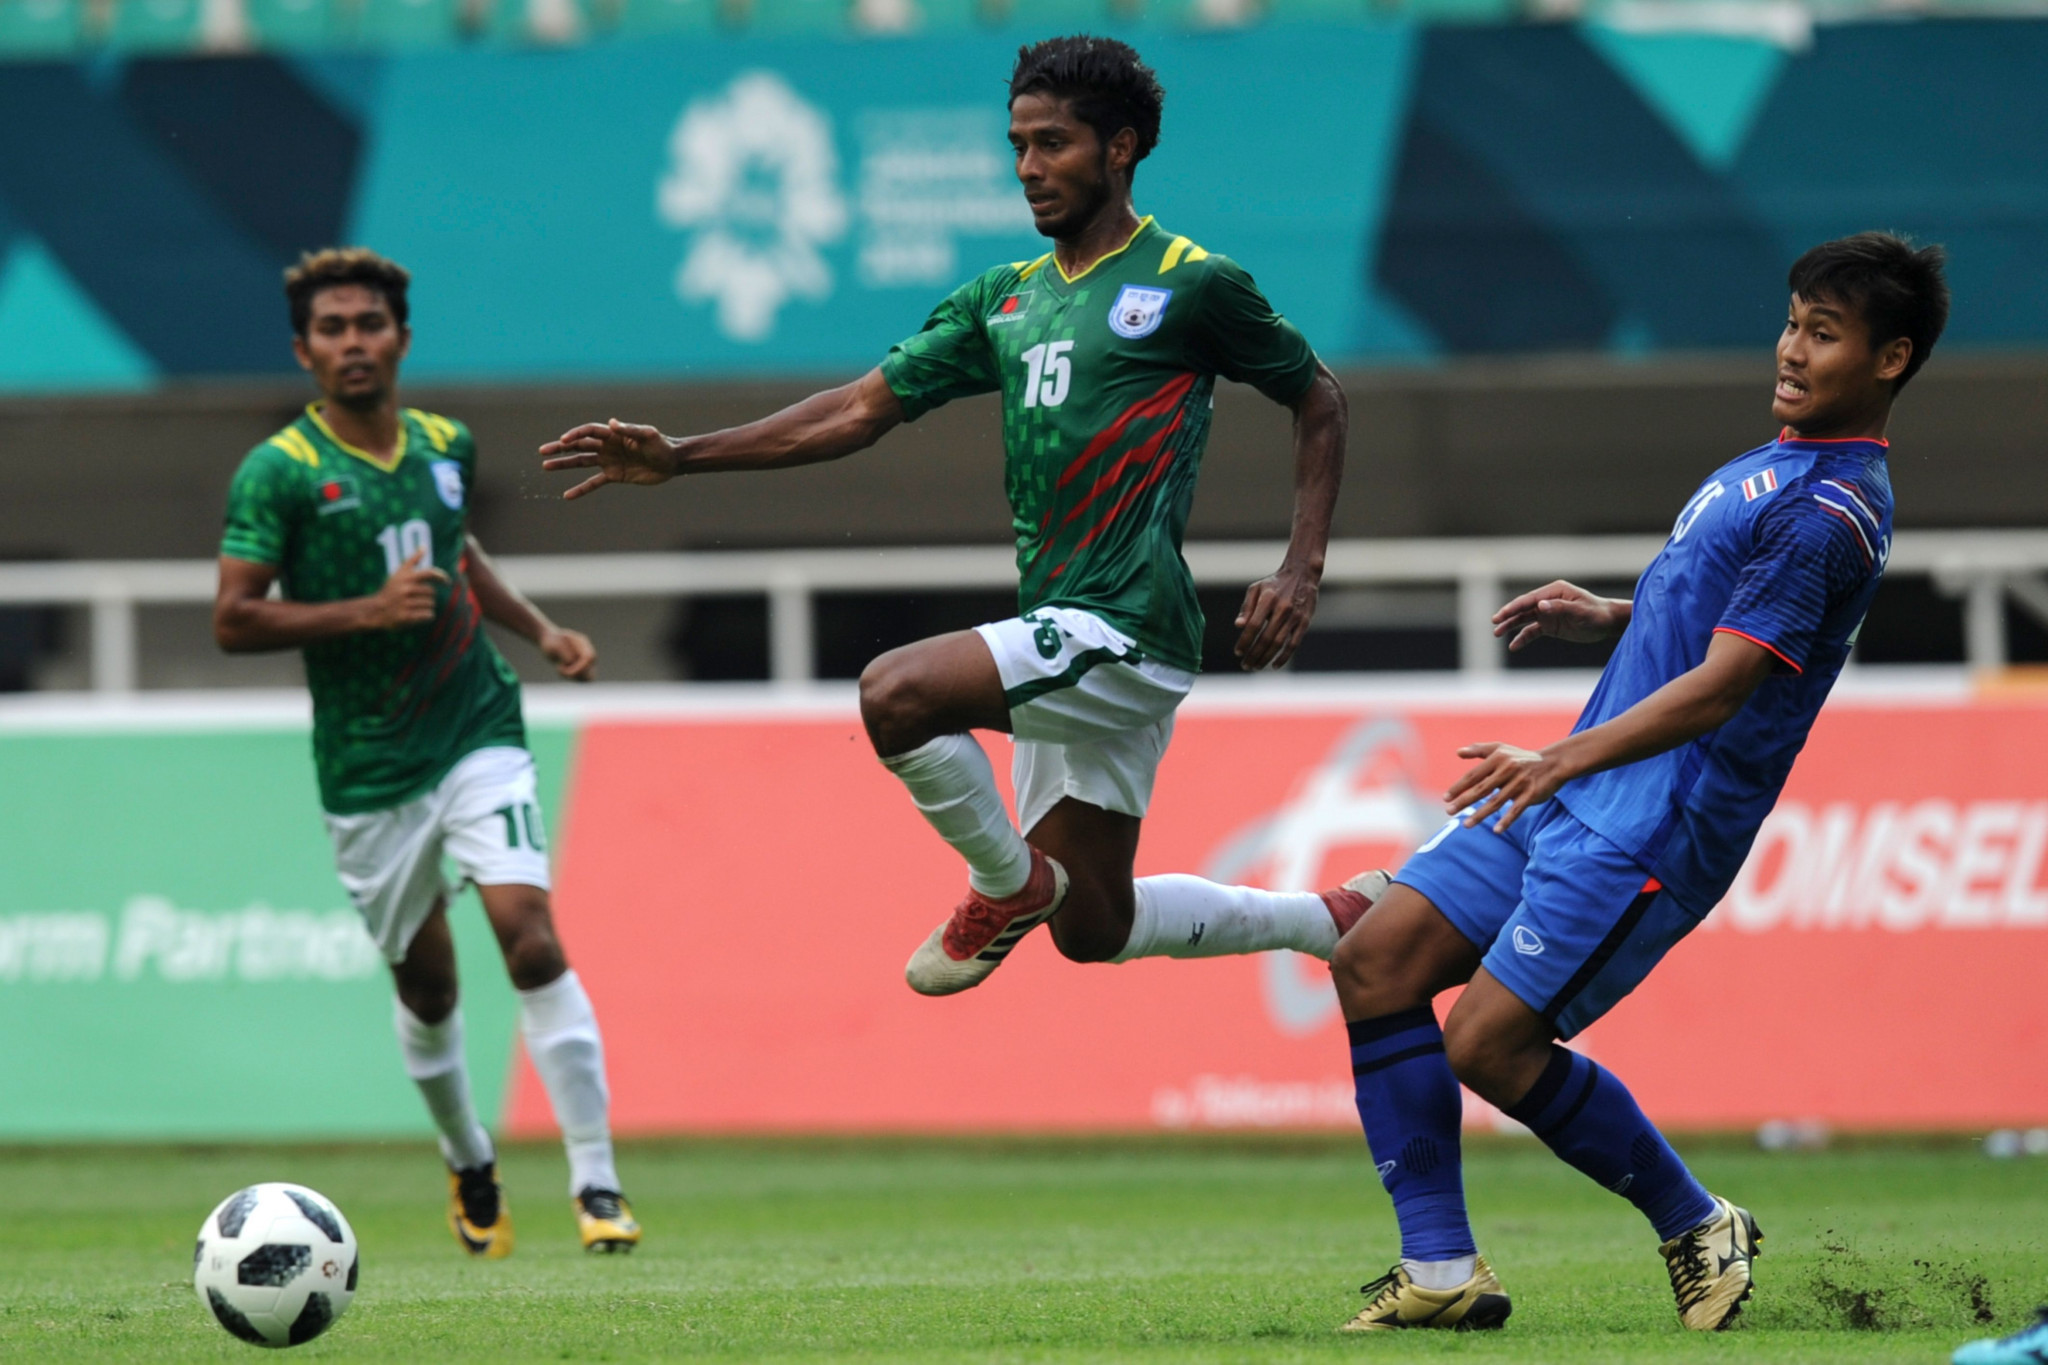 Bangladesh will send a men's football team to Hangzhou 2022 after a decision to block them was overturned ©Getty Images